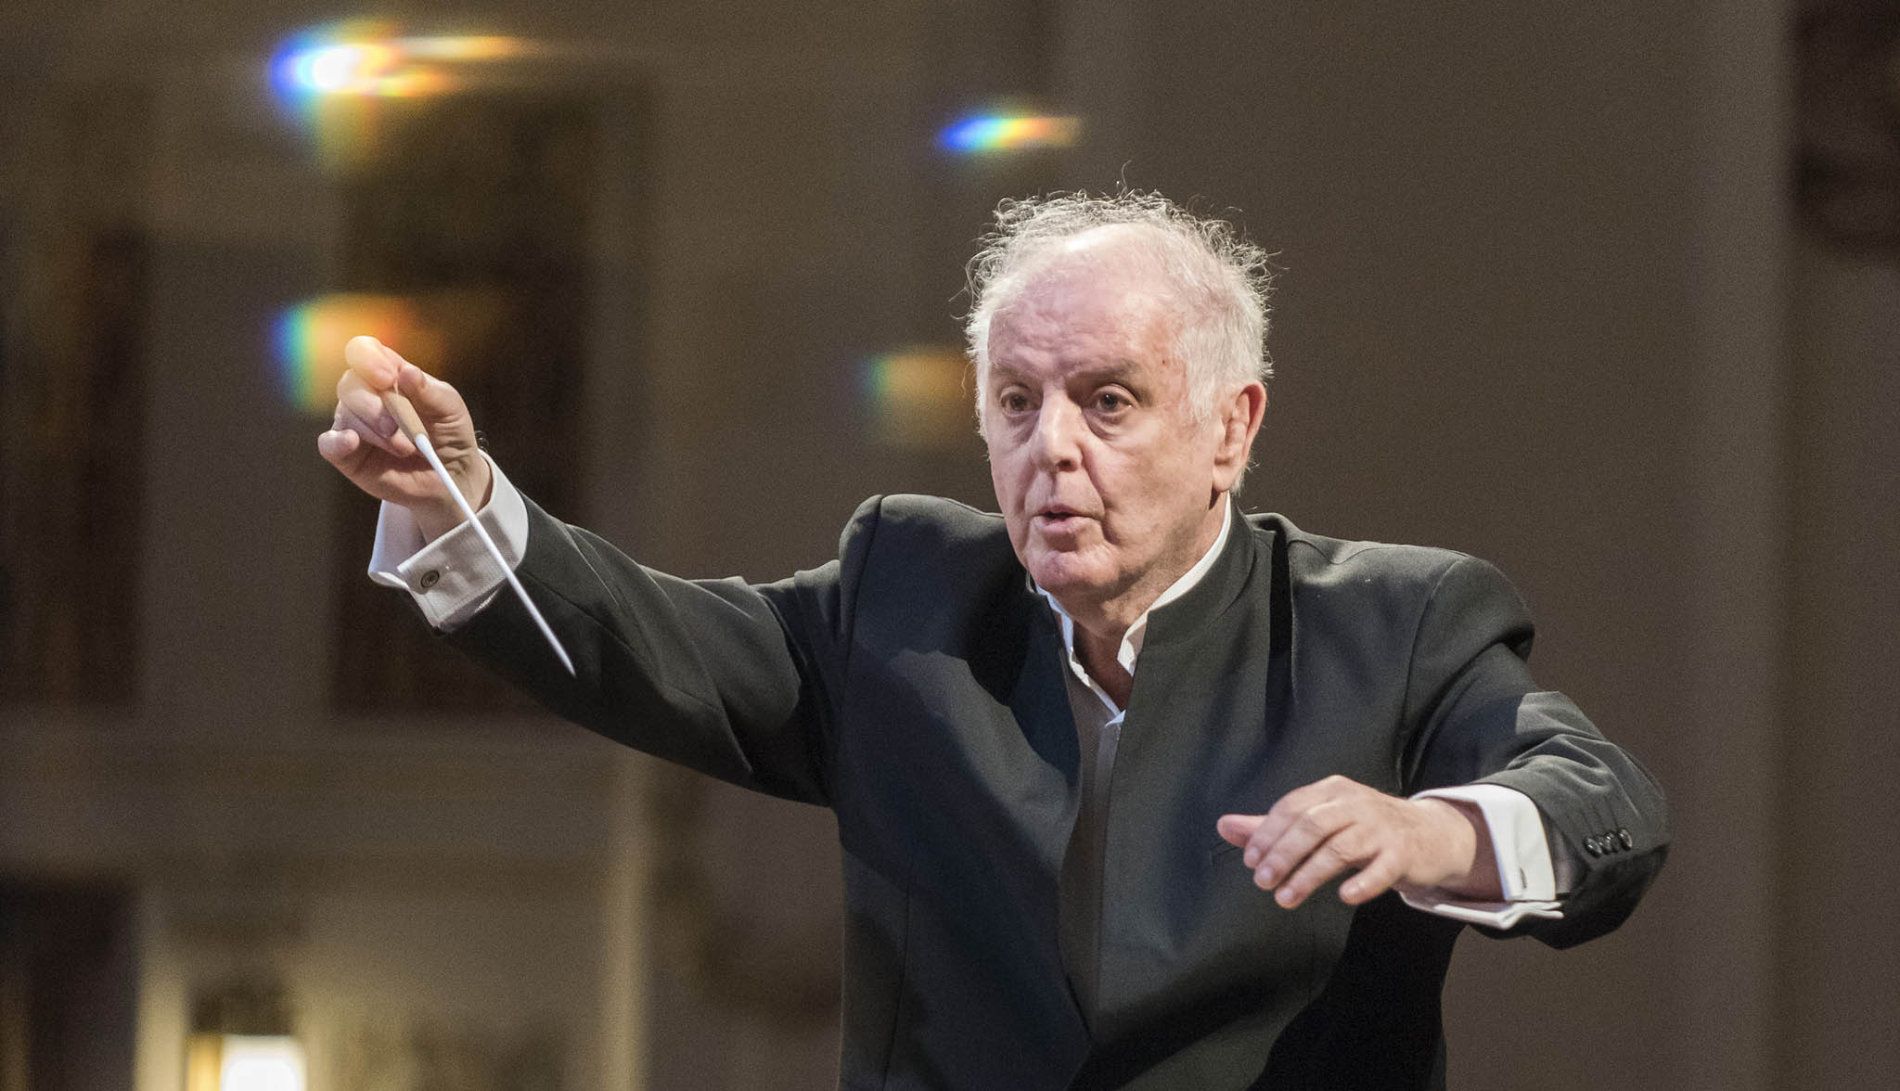 Conductor Barenboim canceled the tour due to health reasons, Prague Spring will not start